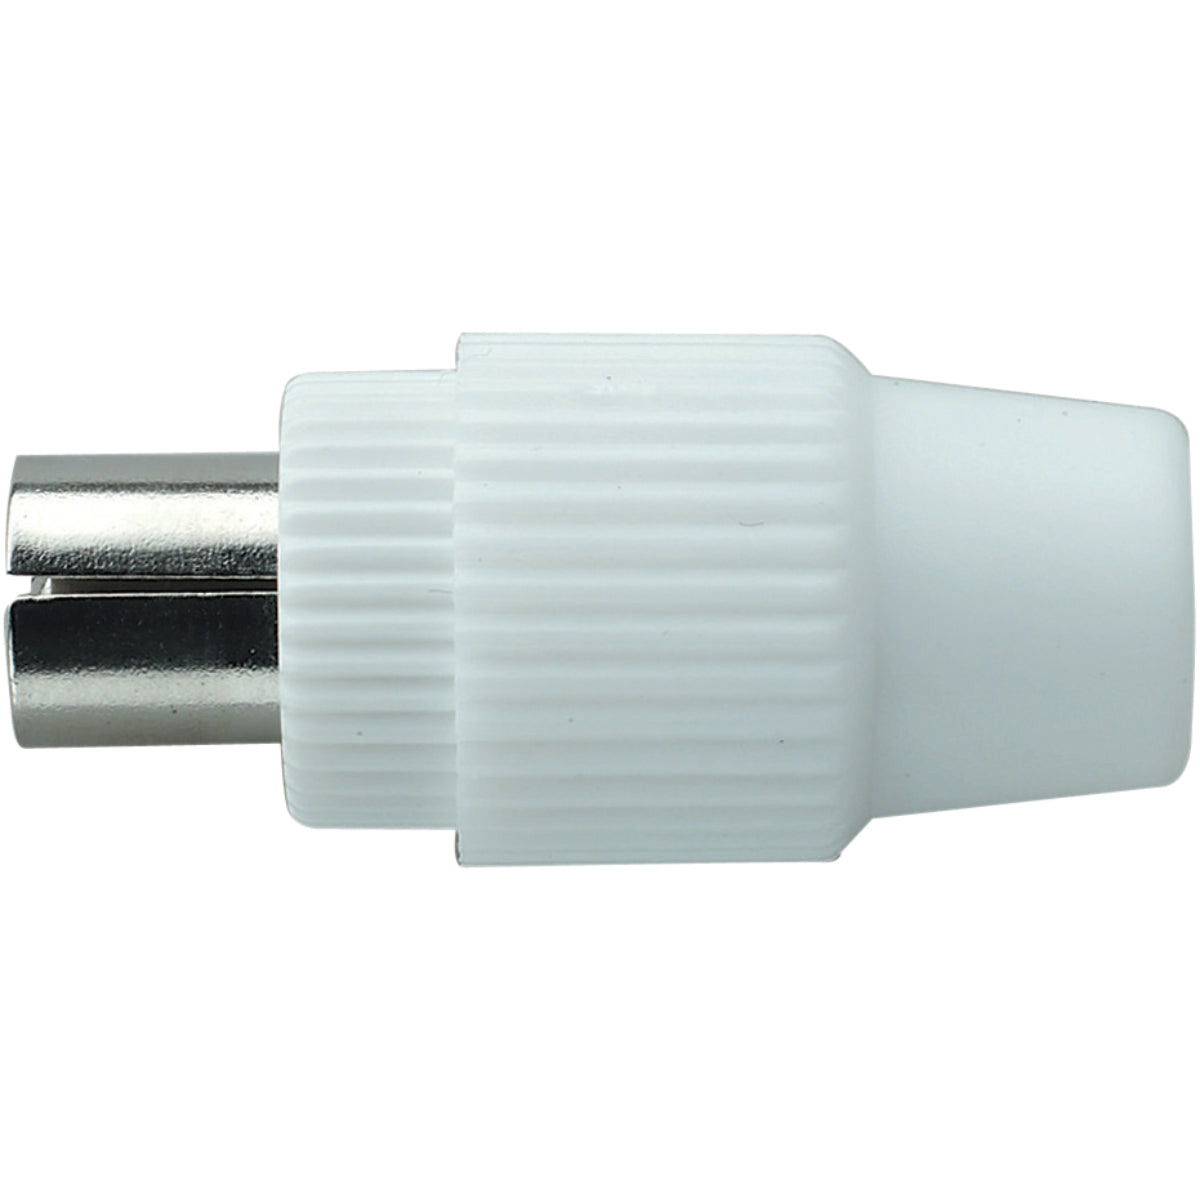 White 9.5Mm Coaxial Line Plug With Plastic Cover And Screw Terminals